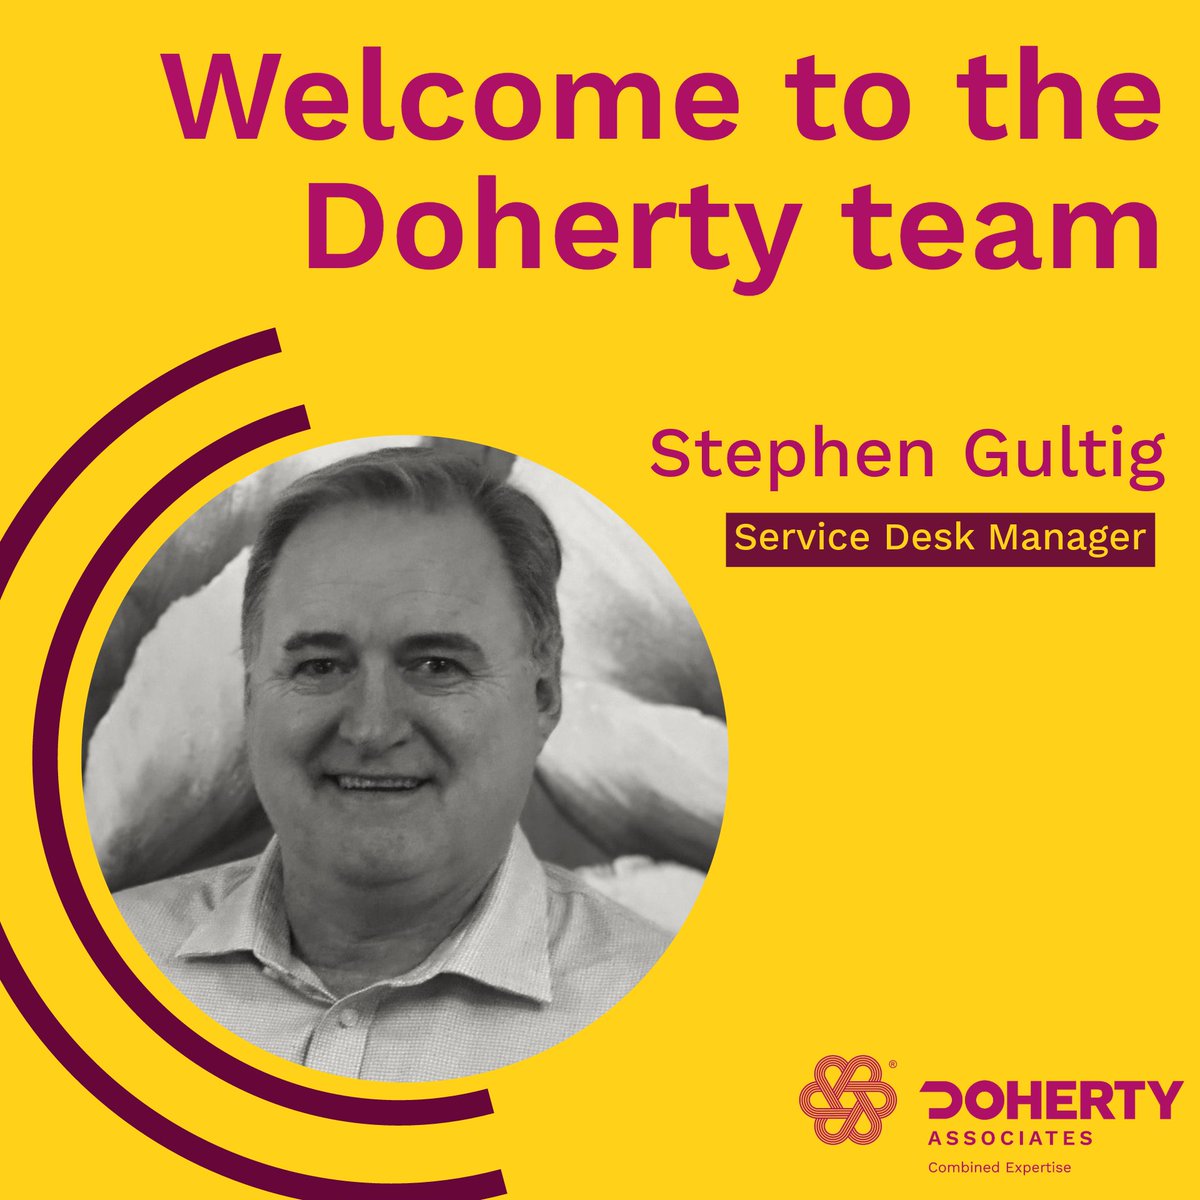 We’re delighted to welcome Stephen Gultig to the team!

Stephen will lead our London support team to ensure the exception experience enjoyed by our clients gets even better – our Service Desk team has achieved a 98% positive feedback rating from our clients over the past 3 years!